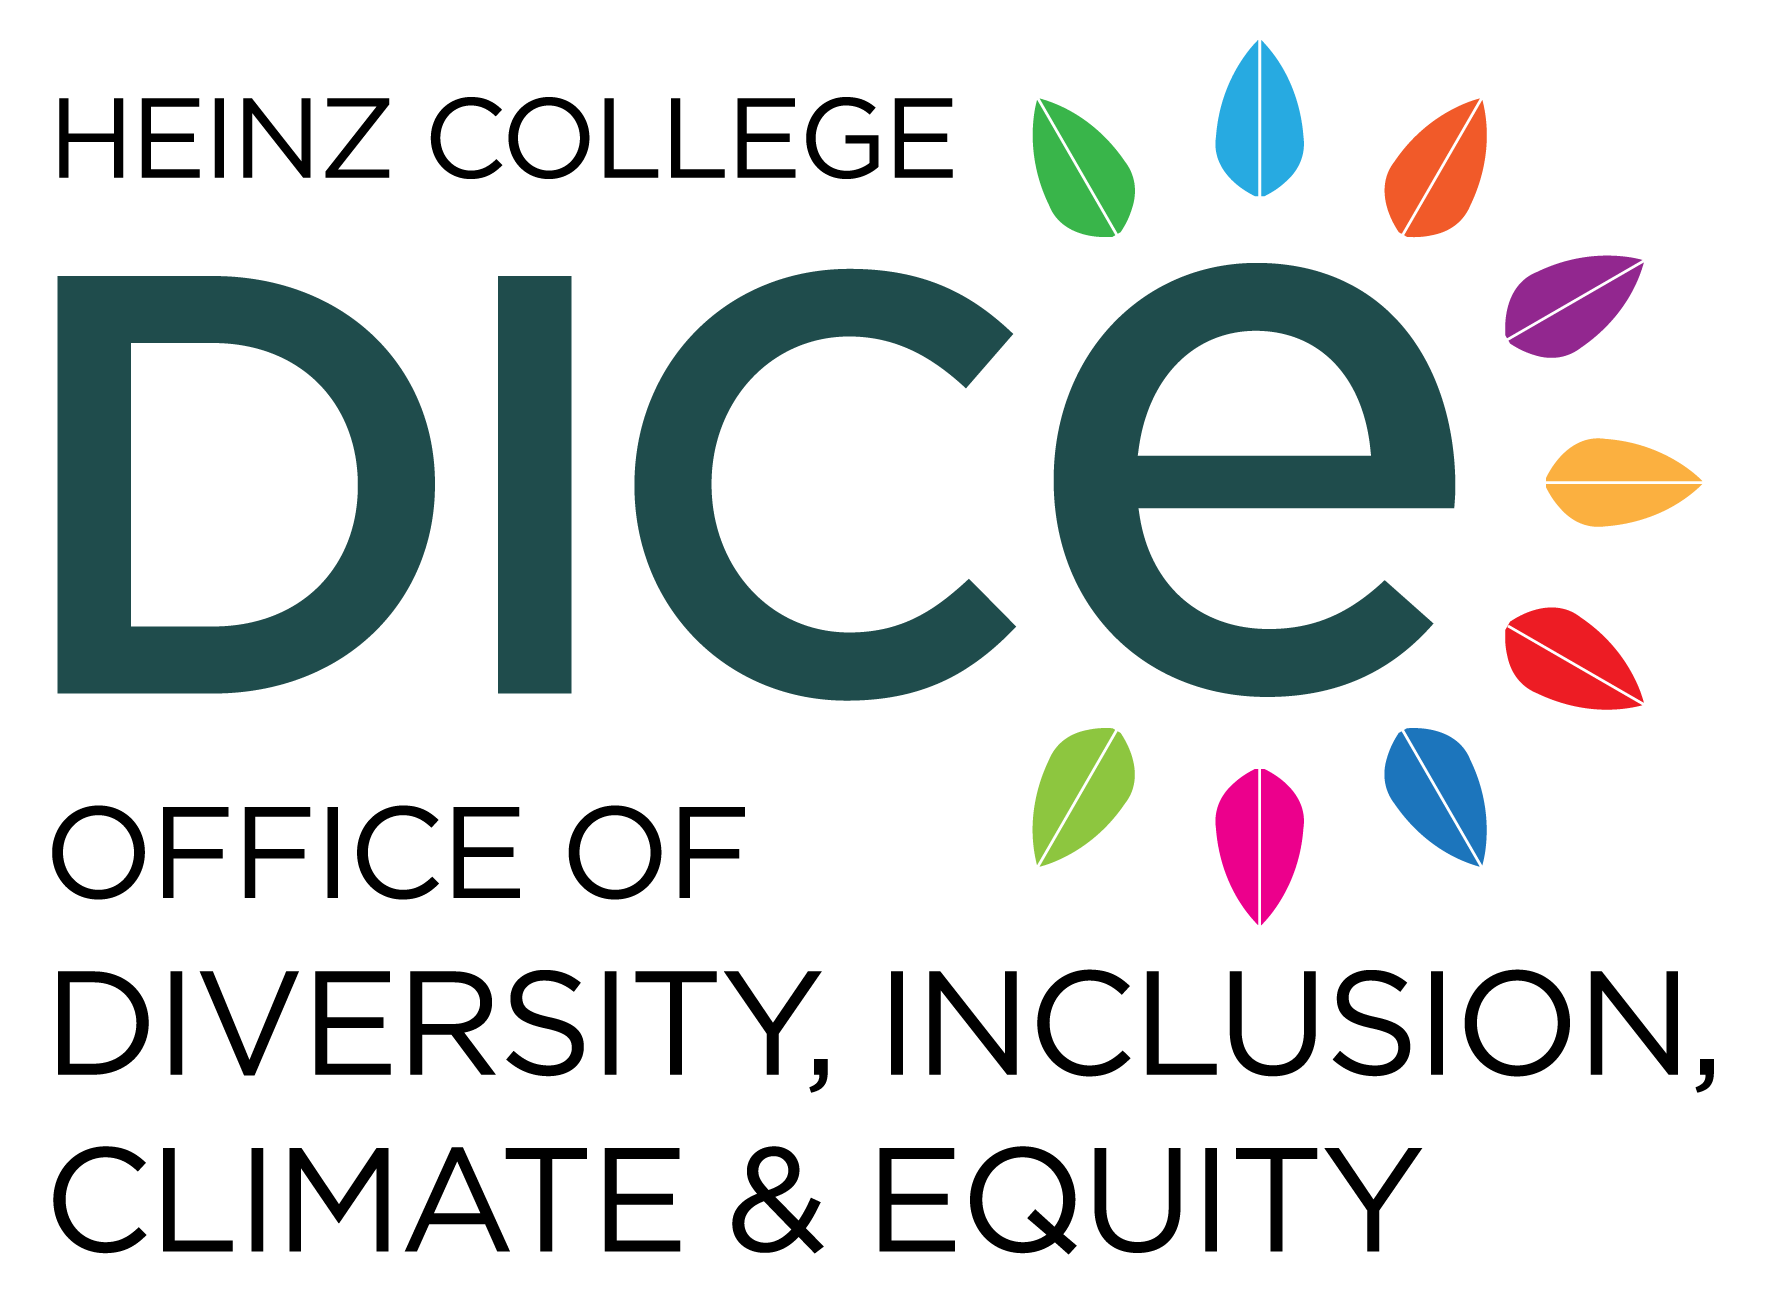 DICE logo - green letters with colorful leaves surrounding the letter "E"